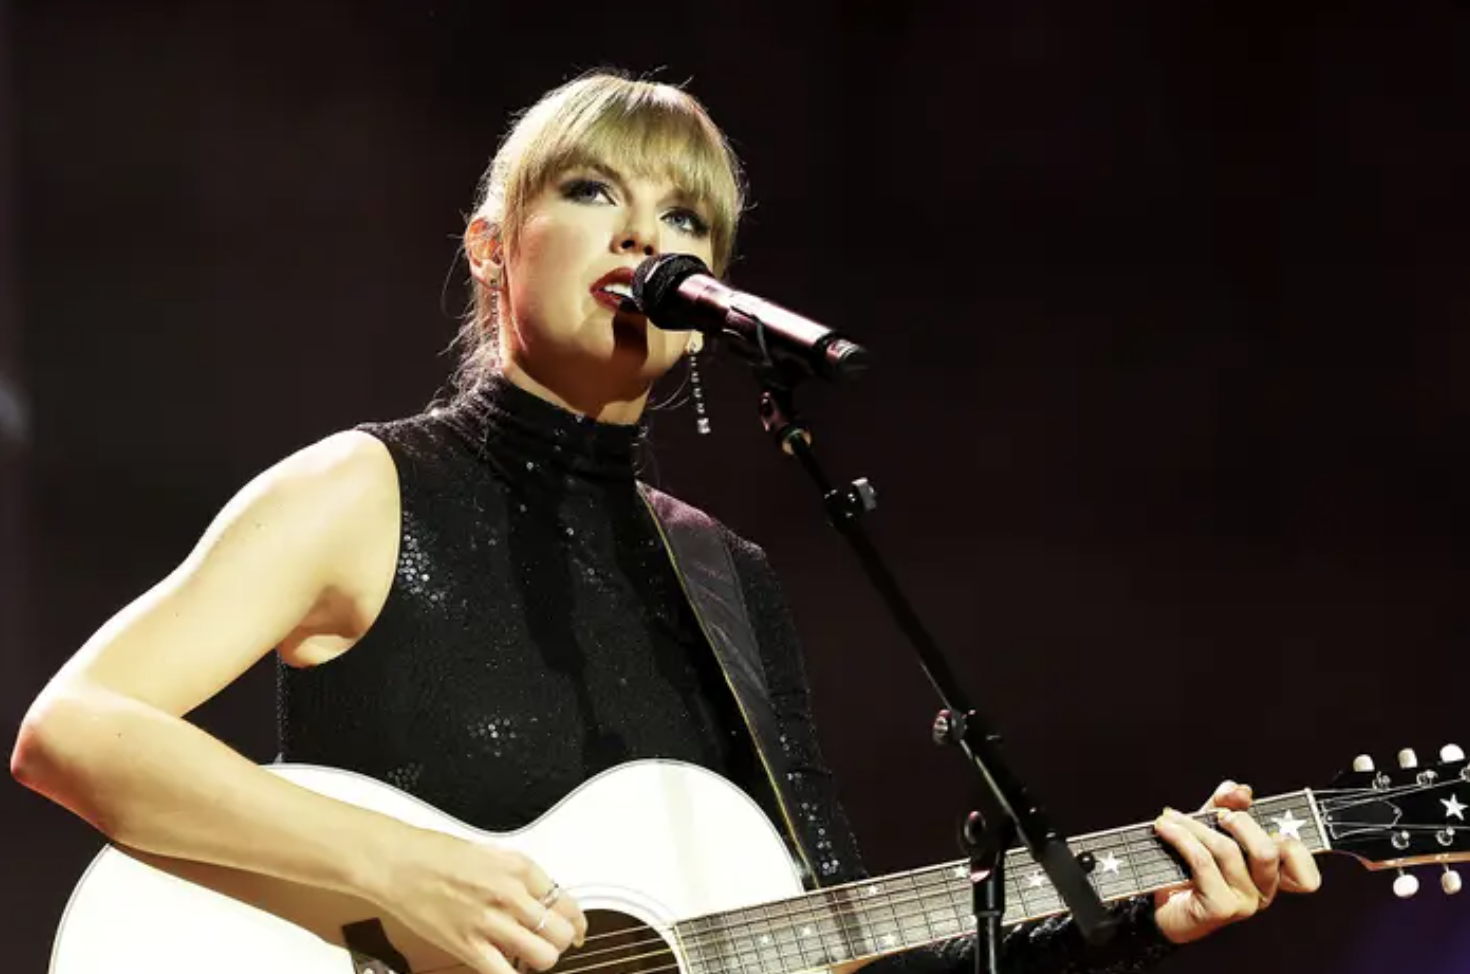 Taylor Swift stands in a sleeveless black top with a guitar in front of microphone